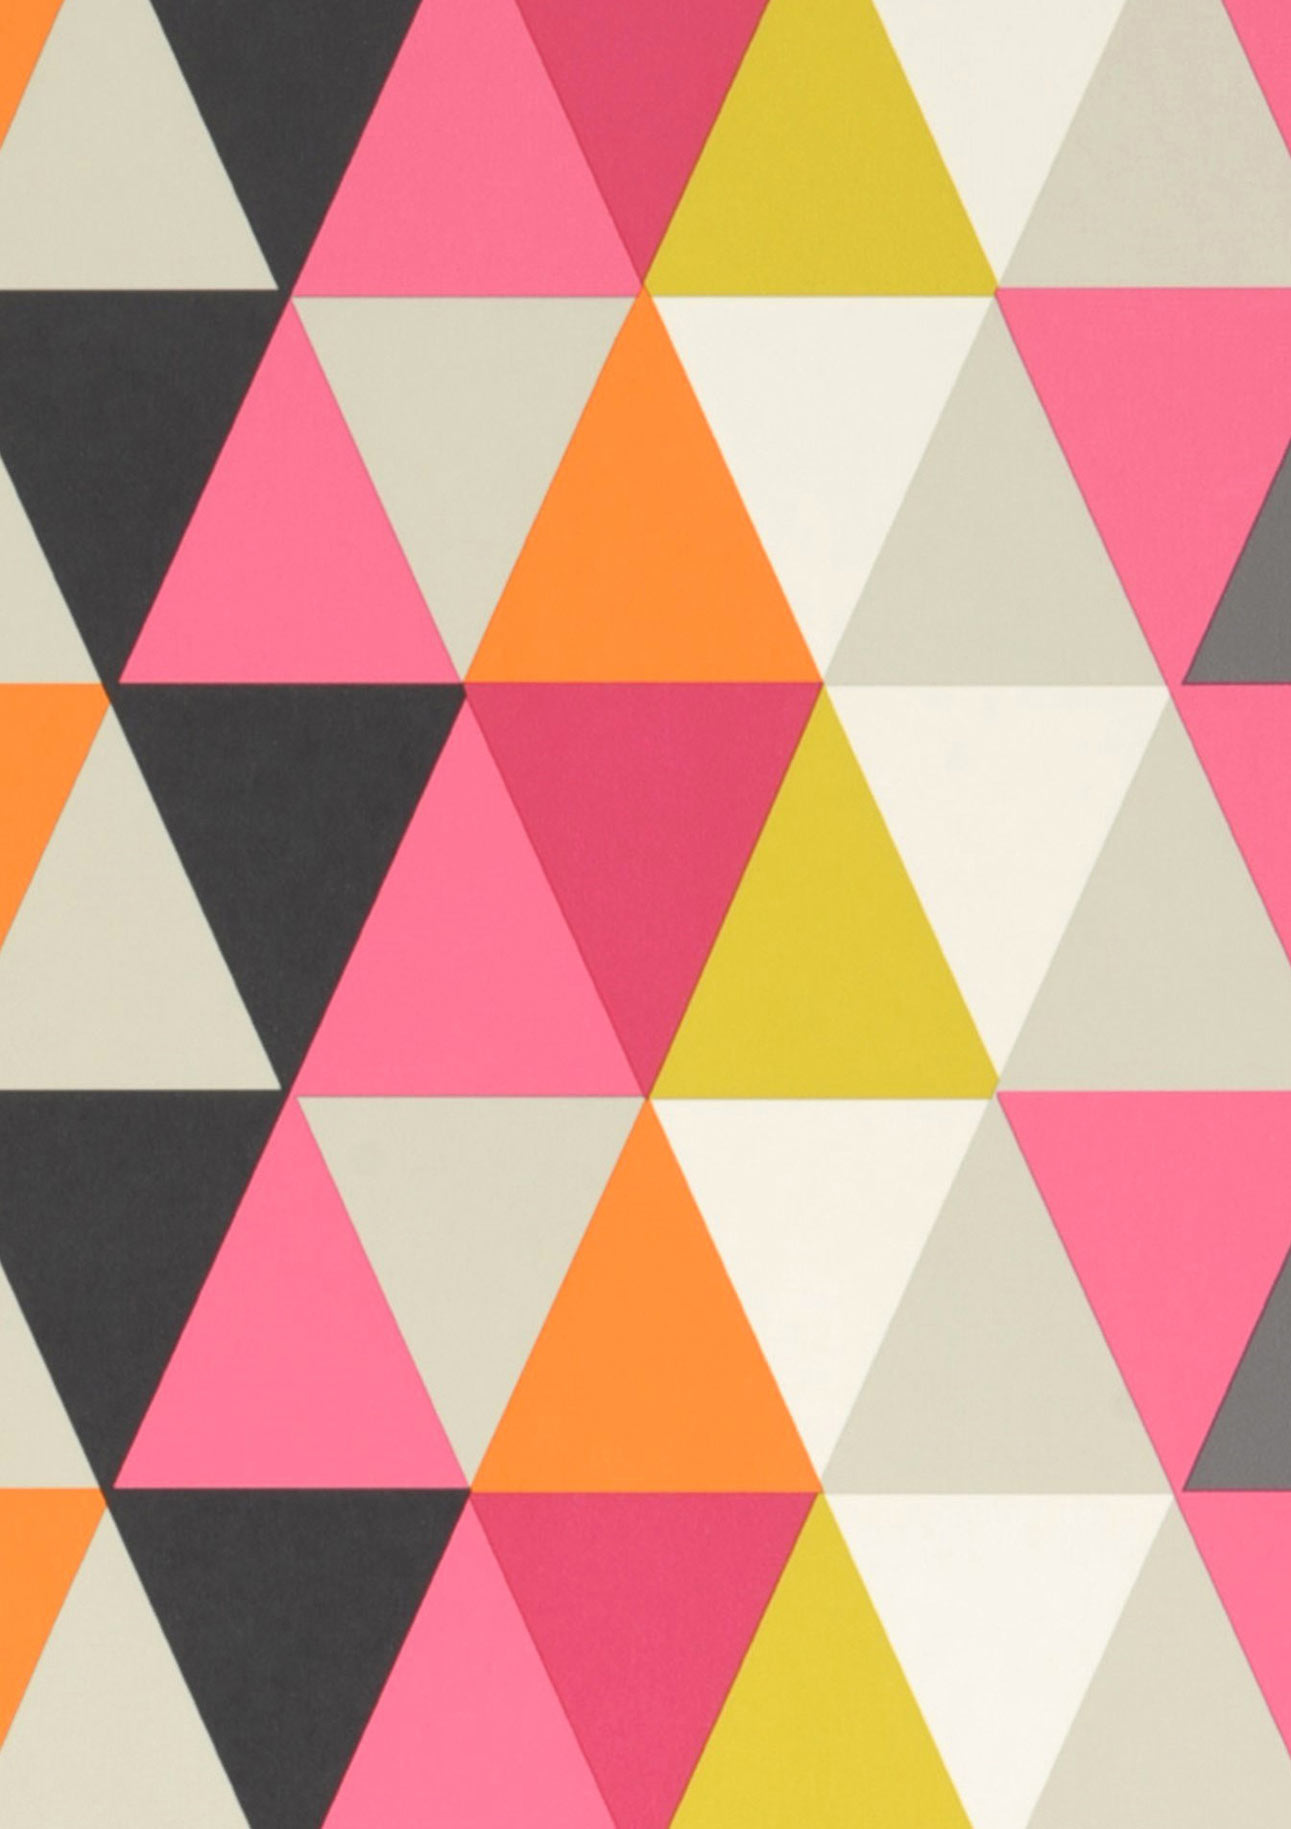 70s Wallpaper Patterns Of The With A